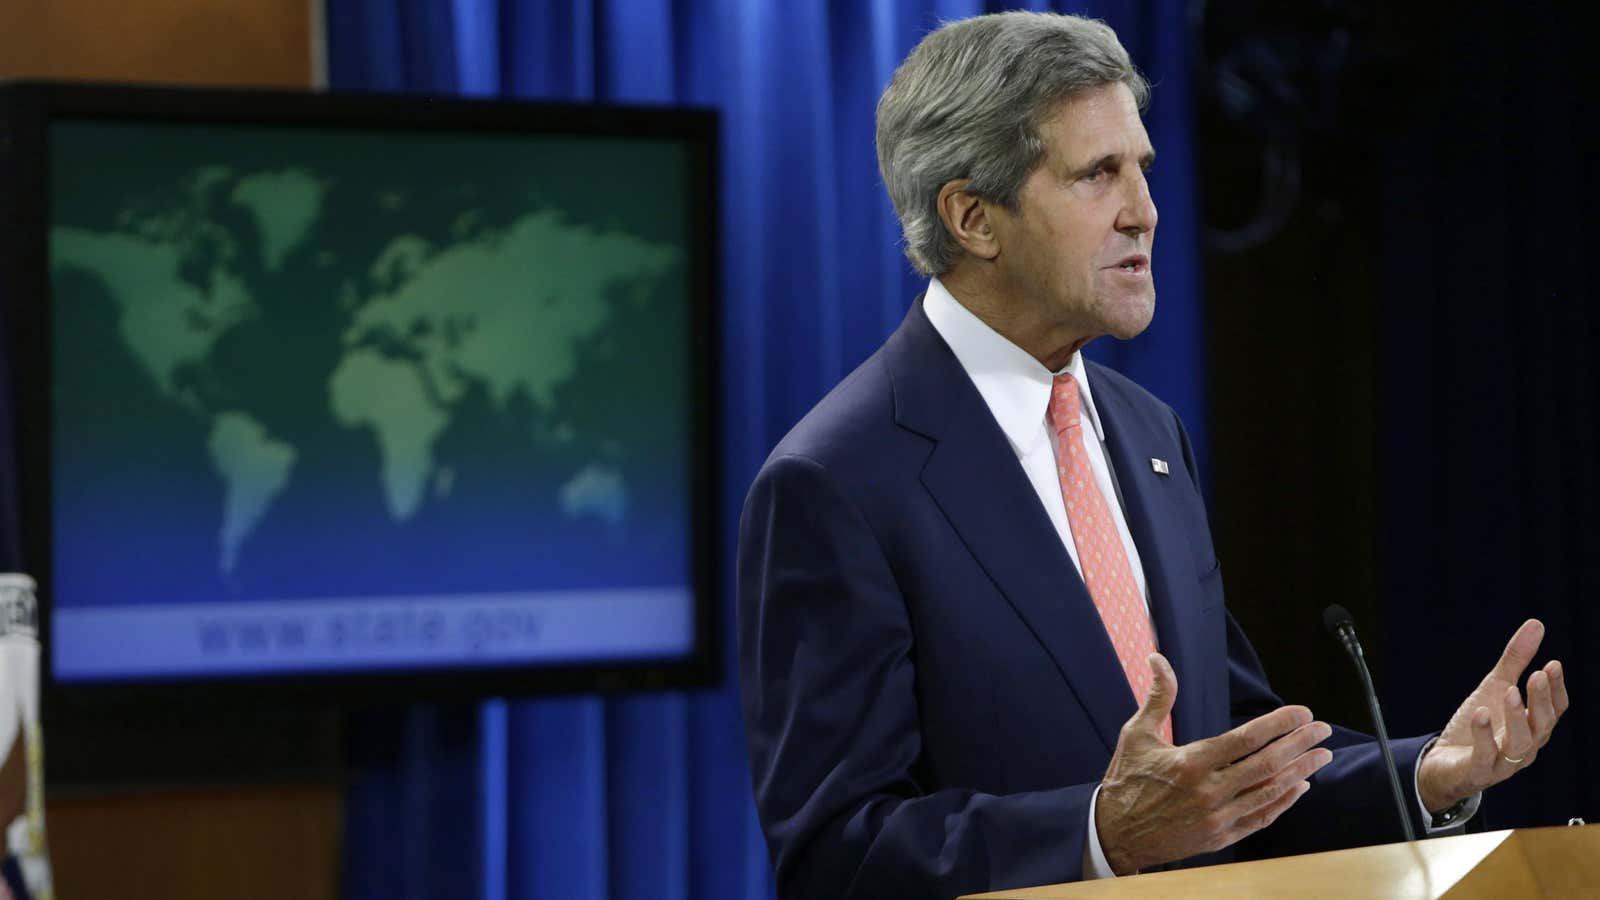 John Kerry made it clear that the US believed Bashar al-Assad to be behind the chemical attack last week.